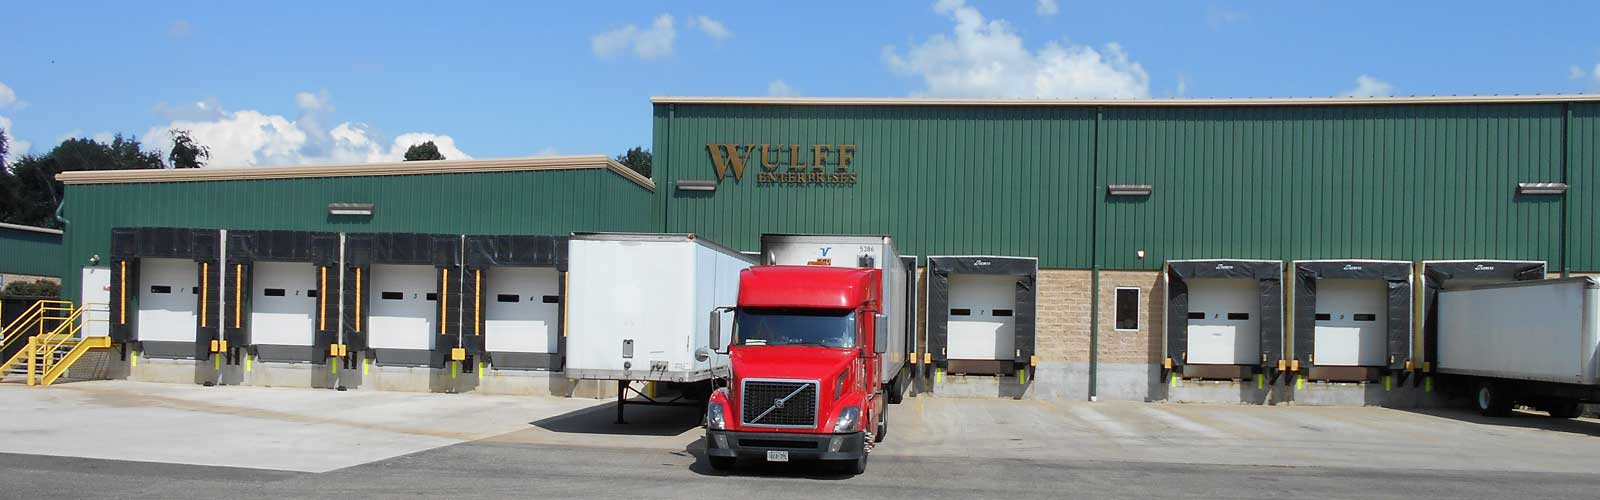 Red cab of Wulff Enterprises tractor-trailer at Wullf loading dock.